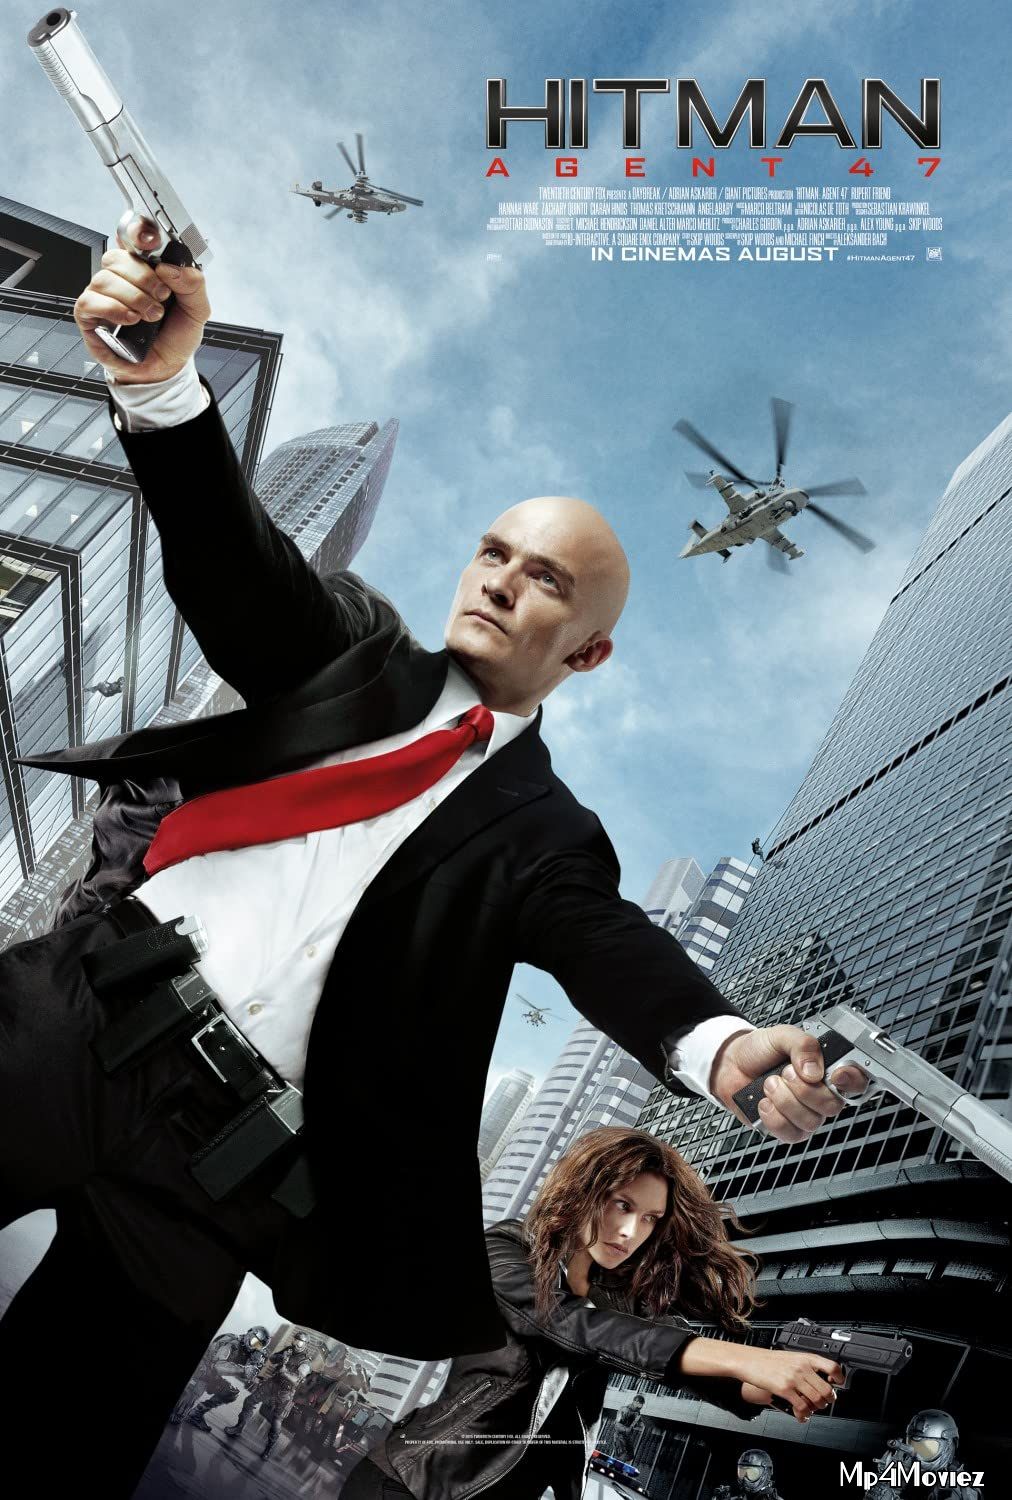 Hitman: Agent 47 (2015) Hindi (Voice Over) Dubbed WEBRip download full movie